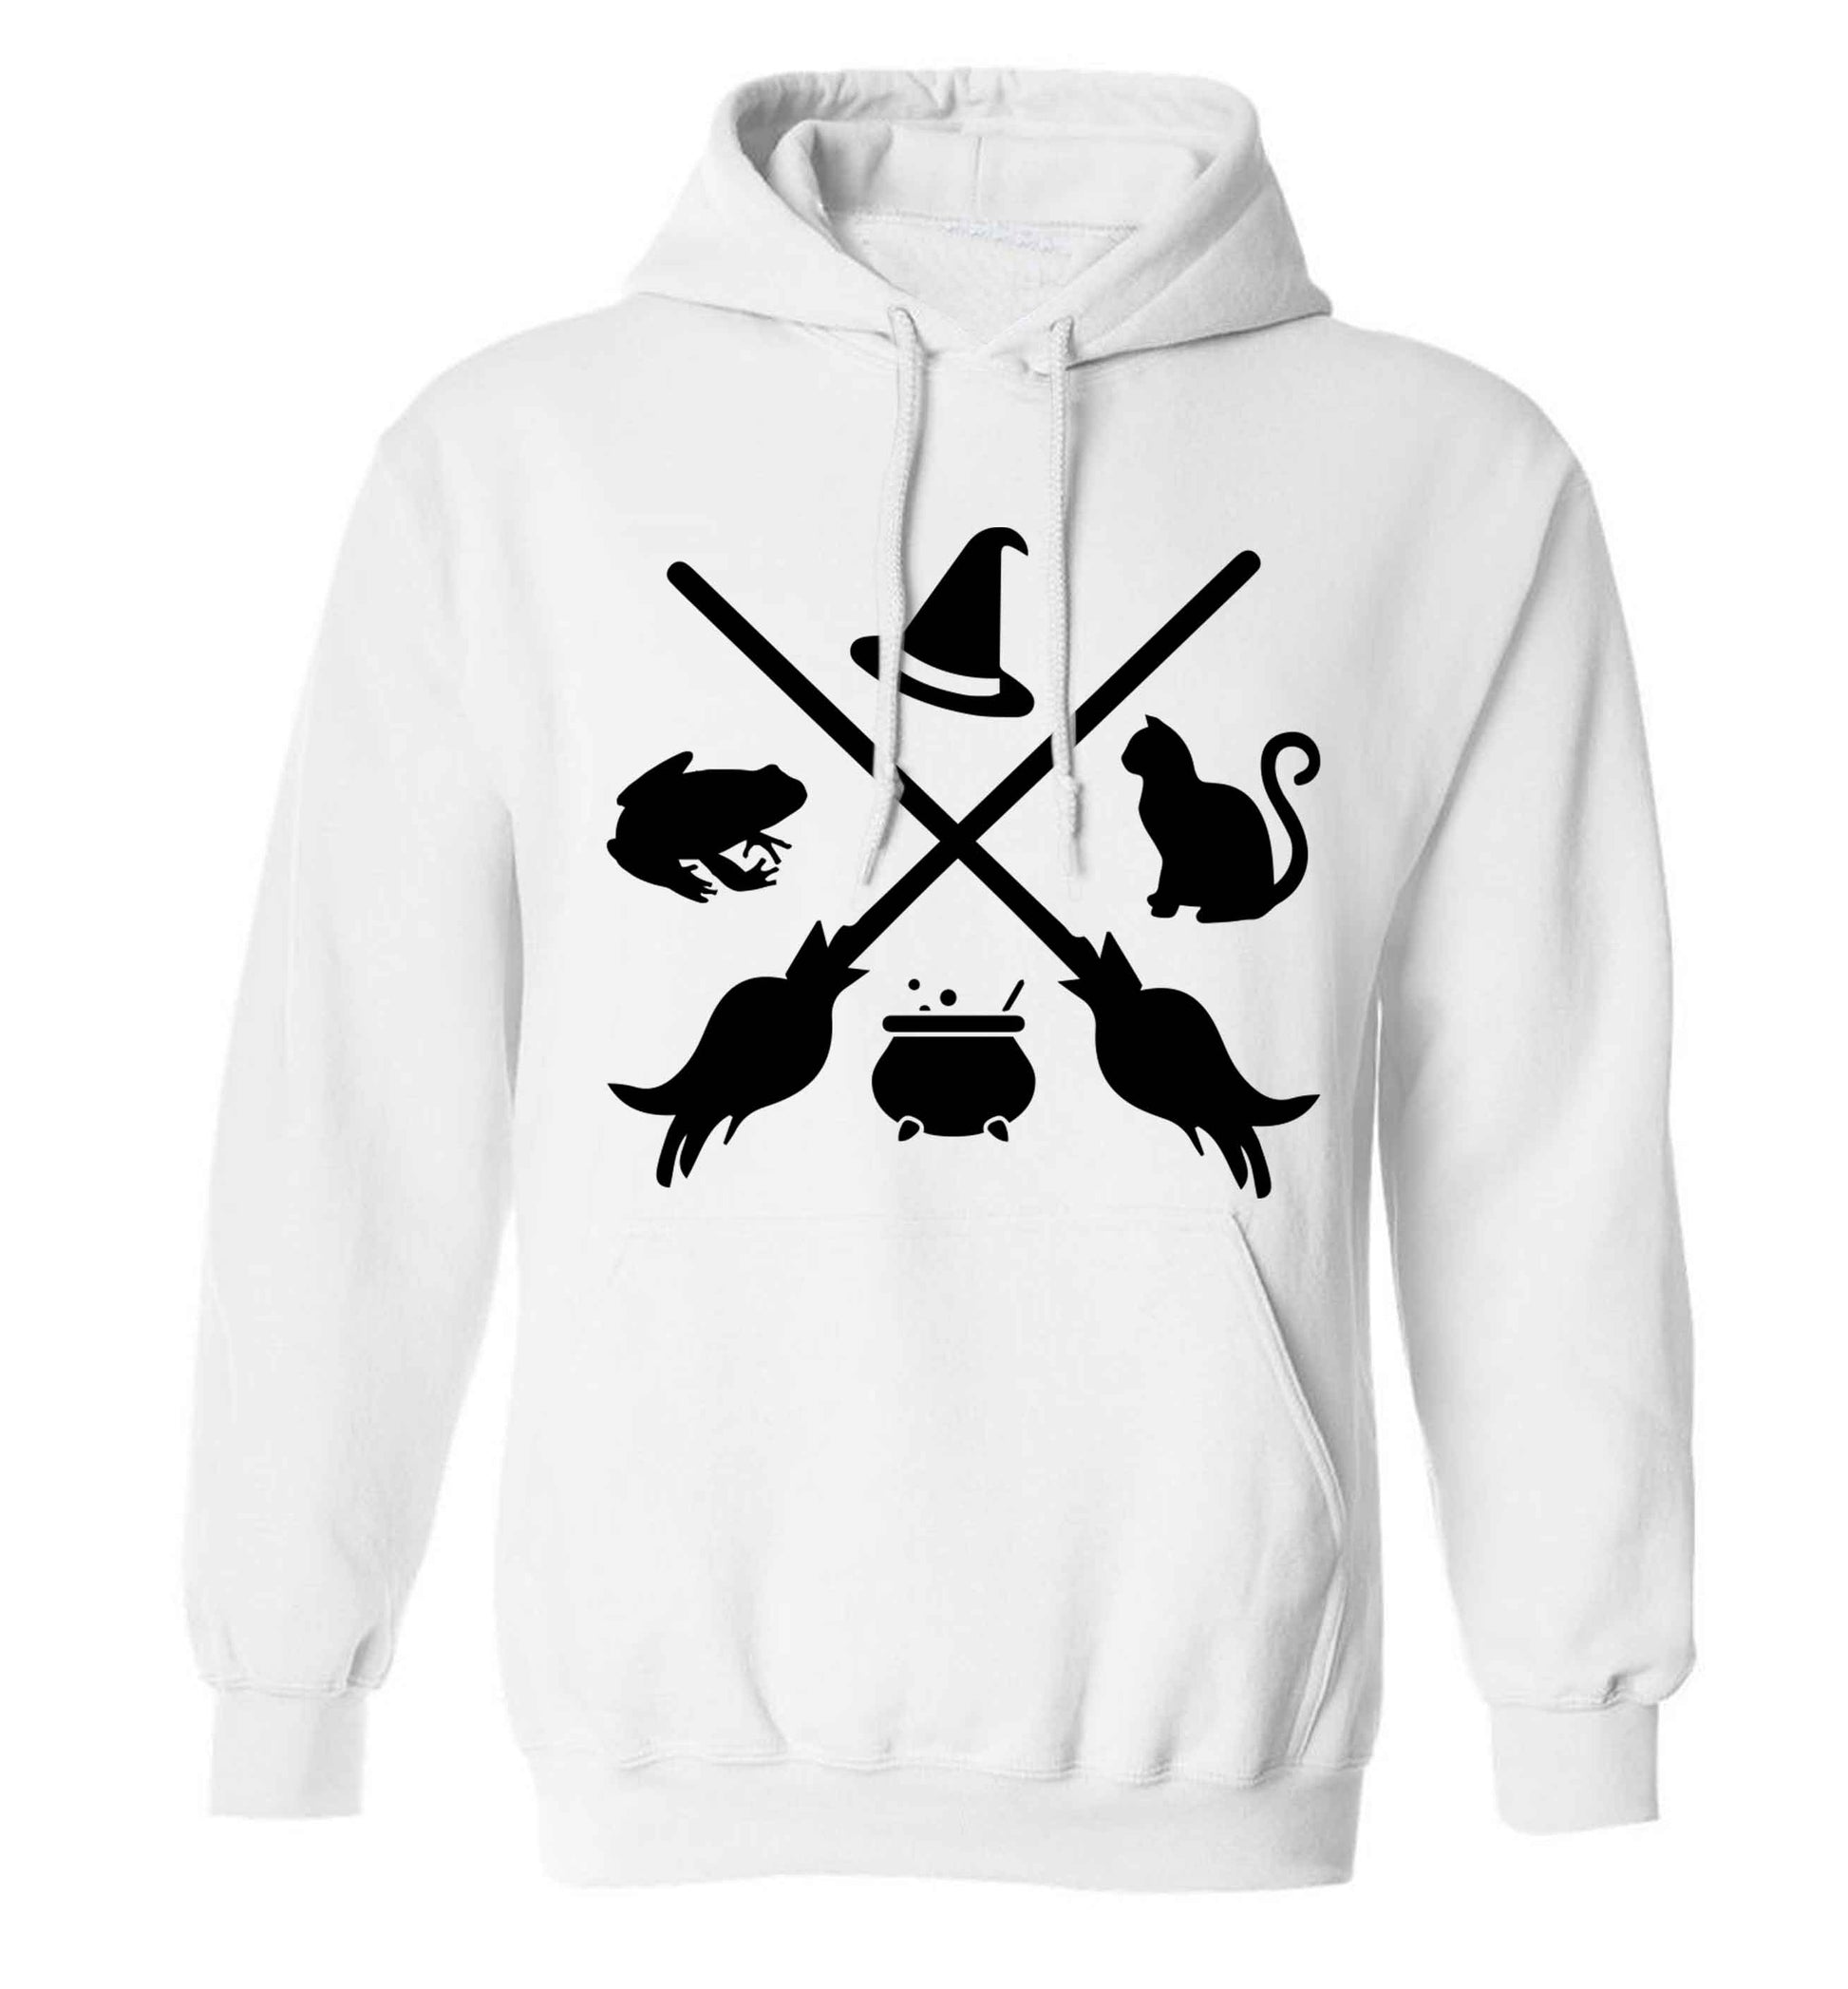 Witch symbol adults unisex white hoodie 2XL